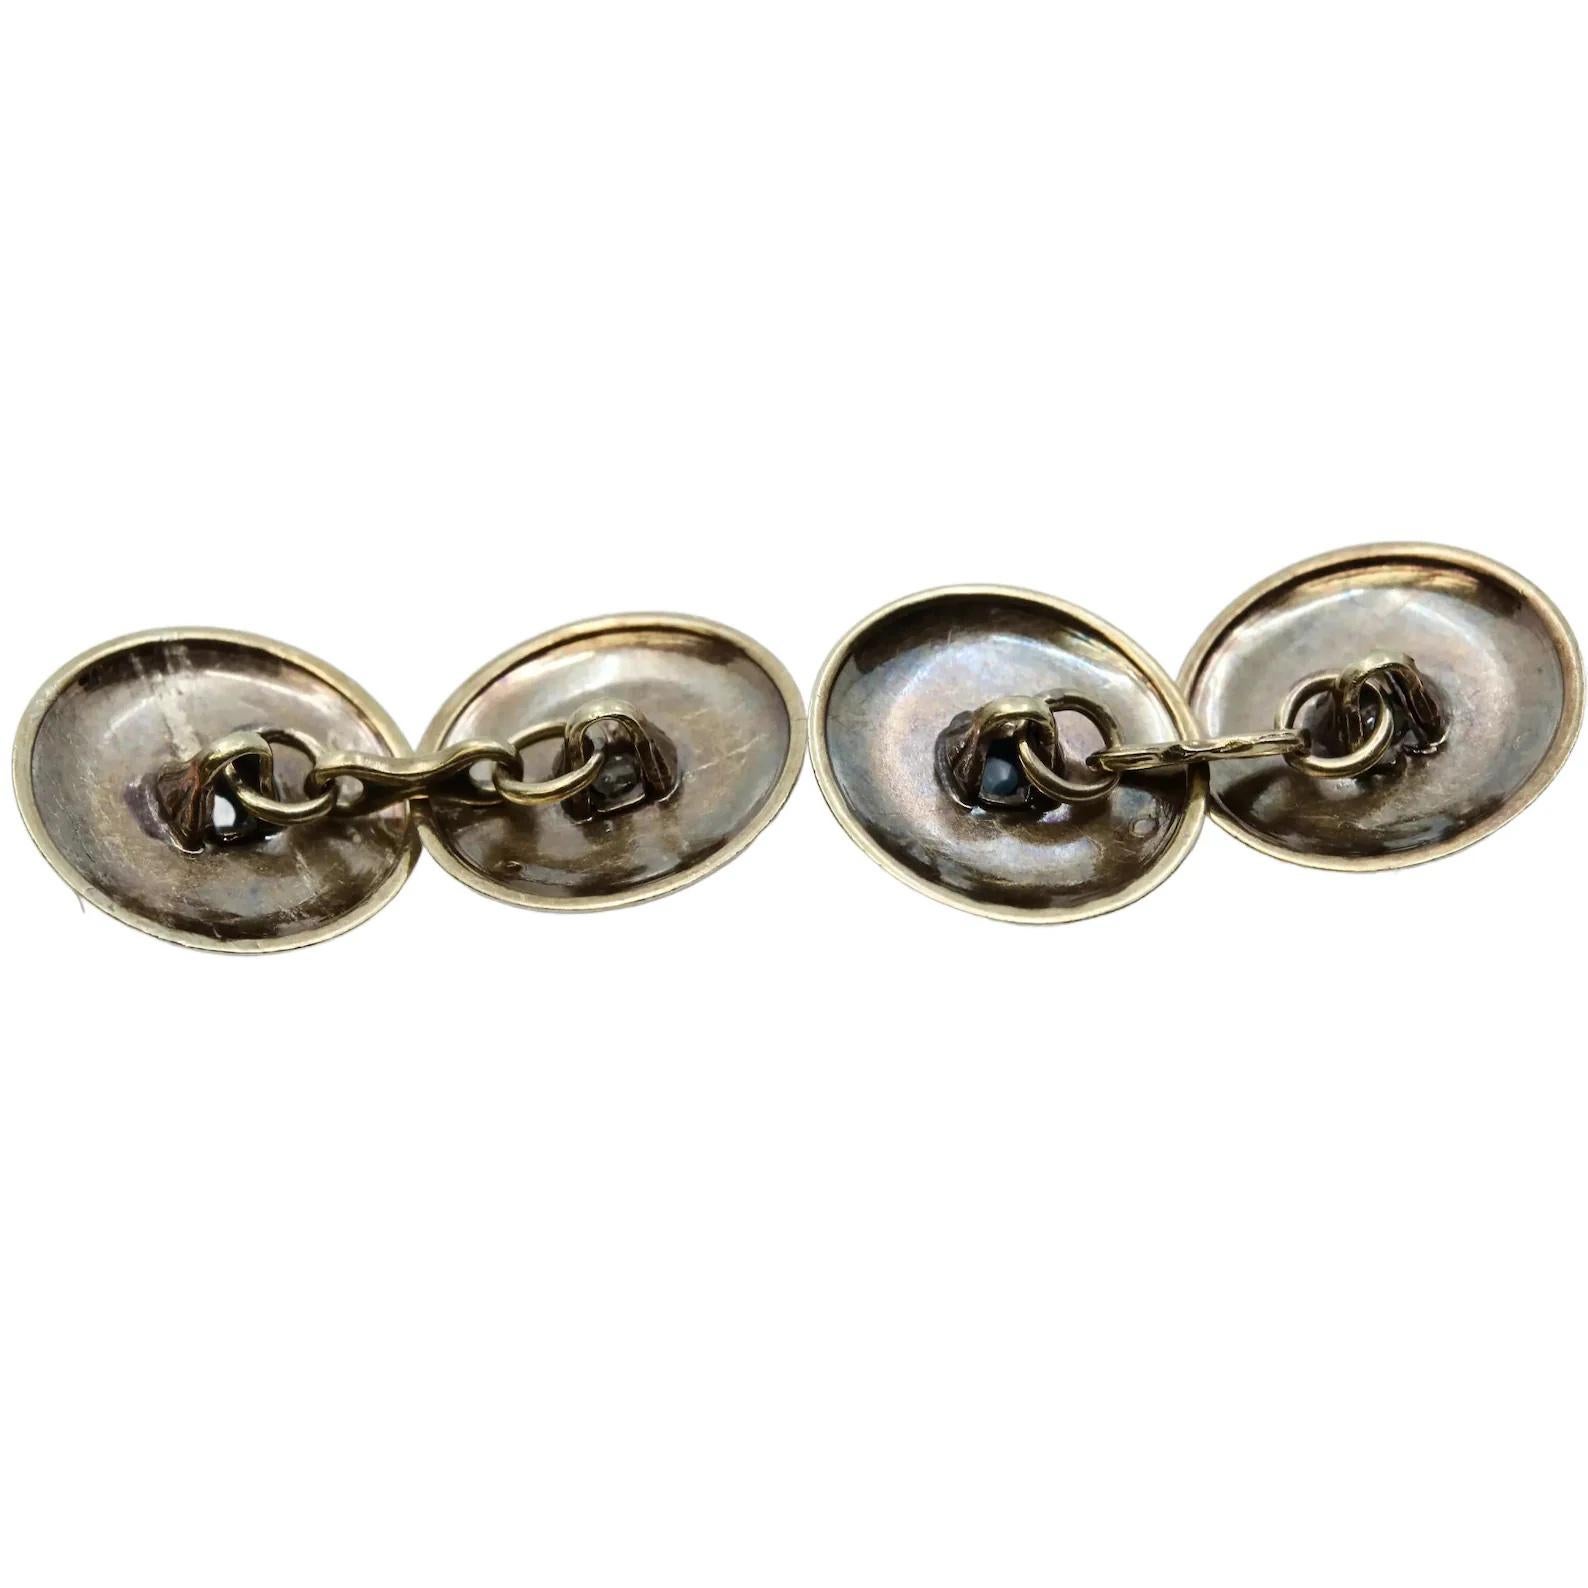 A pair of handmade mens night and day cufflinks in platinum atop 14 karat yellow gold. Designed with the belief that a gentleman should only wear diamonds after dark, these cufflinks are a great example of a late victorian tradition which carried